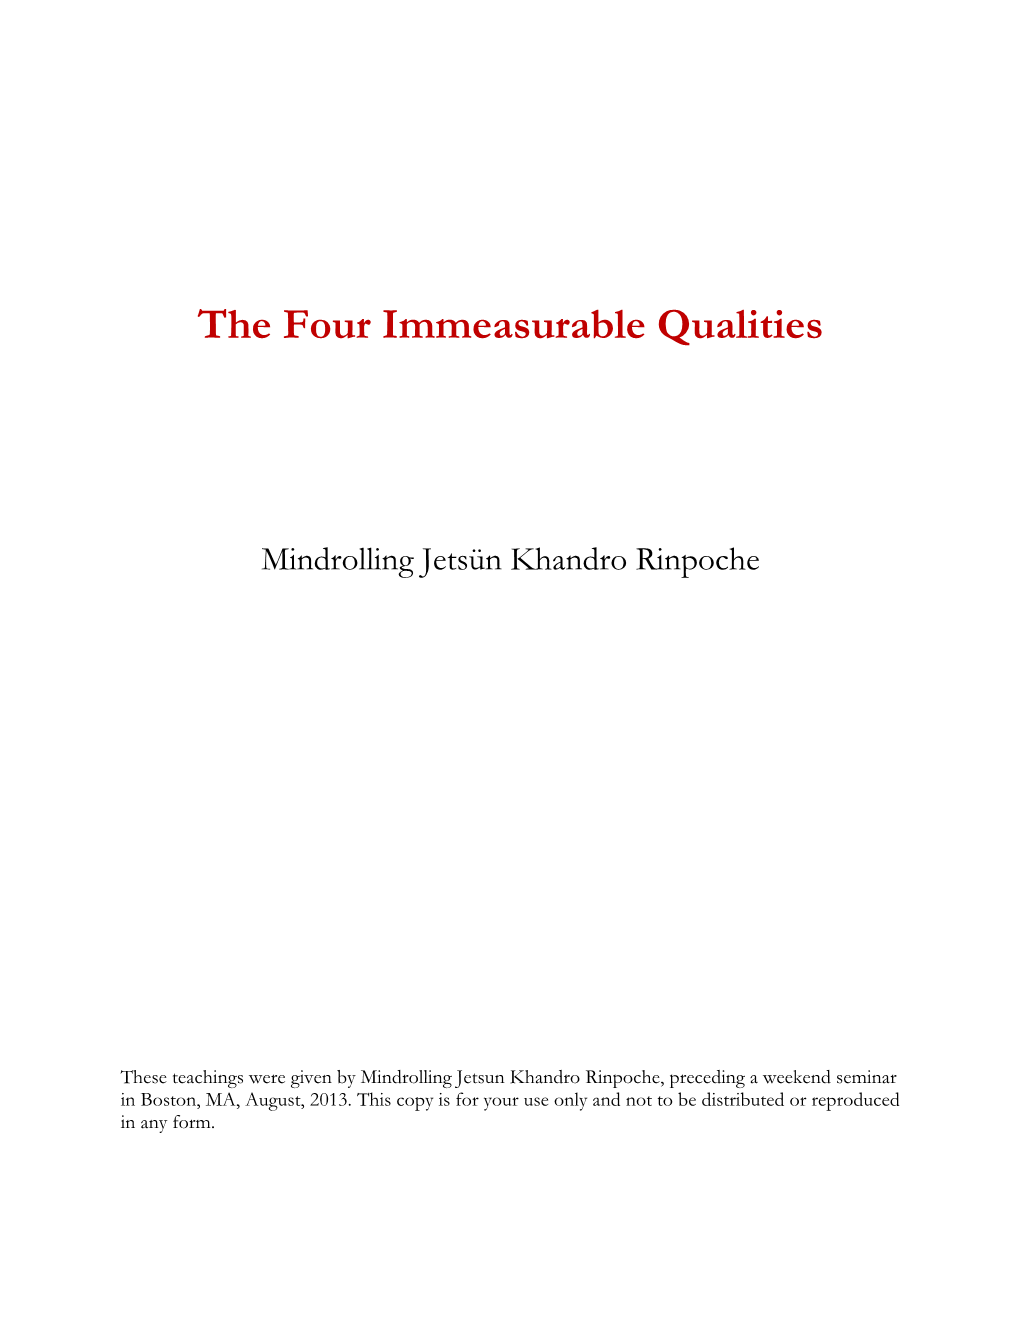 The Four Immeasurable Qualities